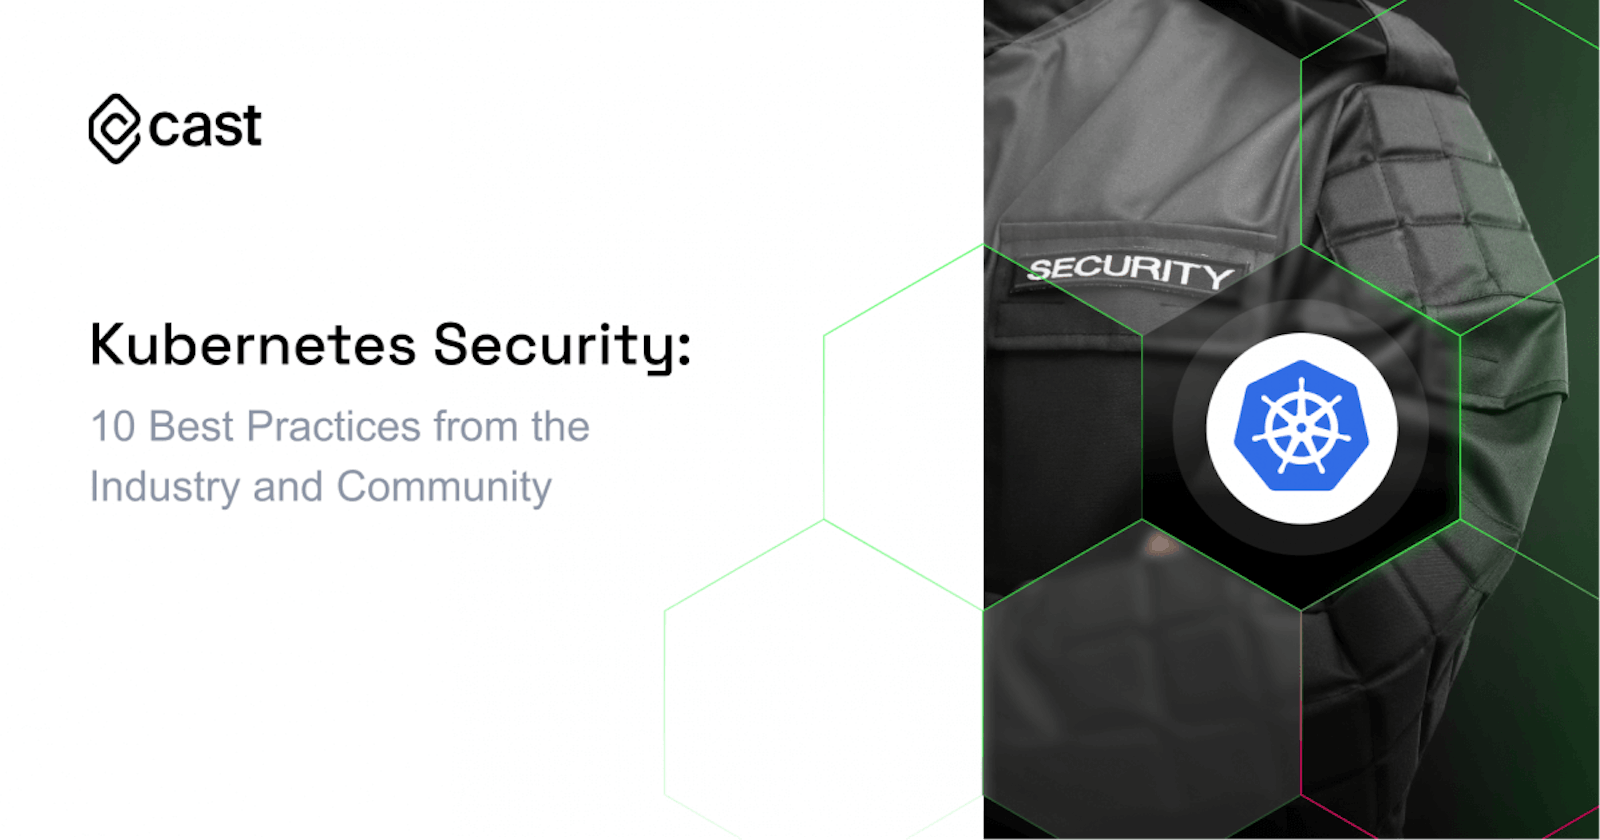 Kubernetes Security: 10 Best Practices from the Industry and Community